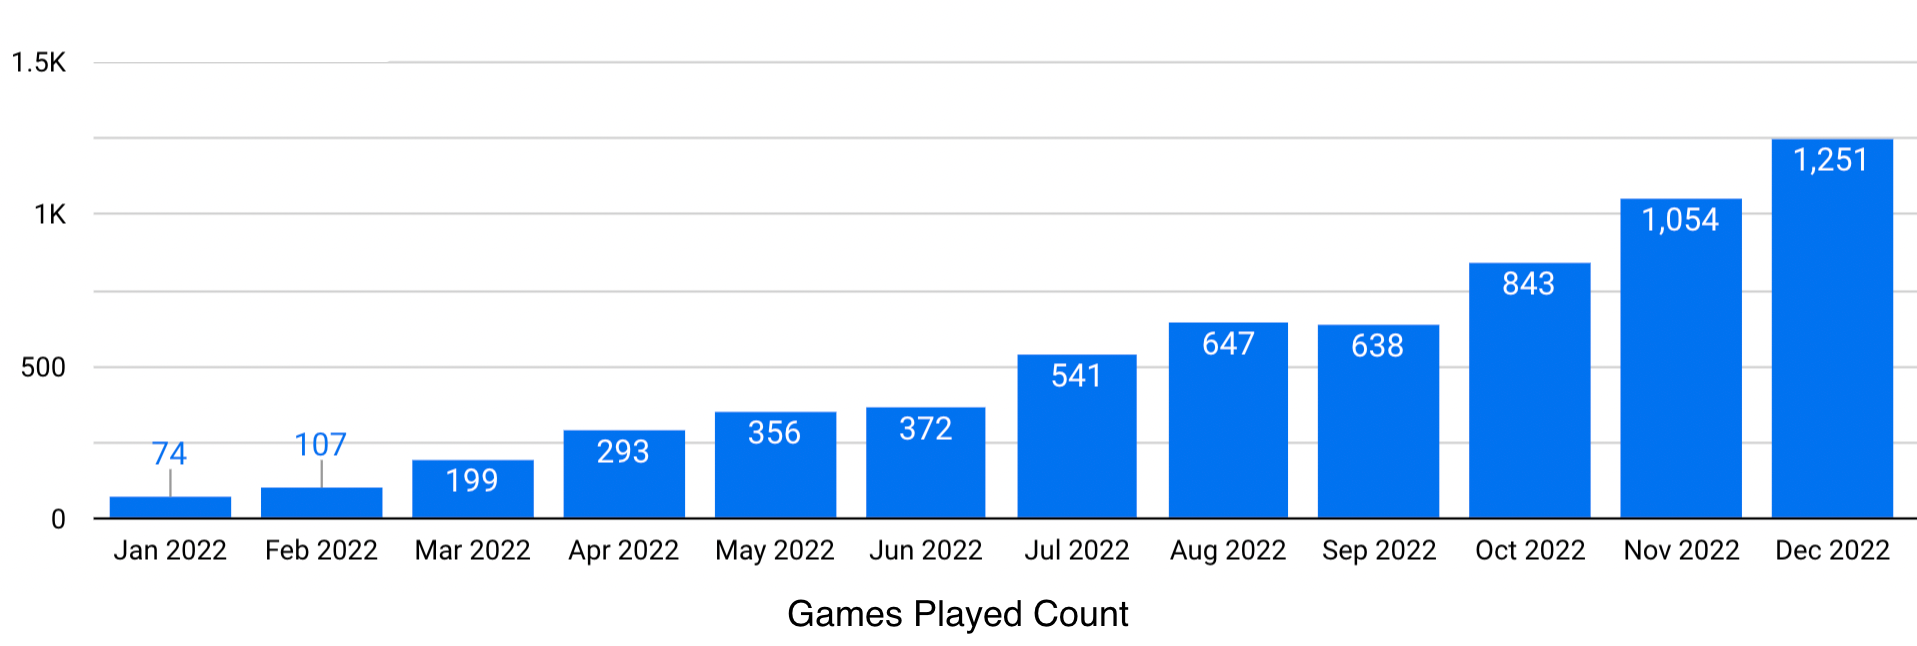 Games Played Monthly 2022